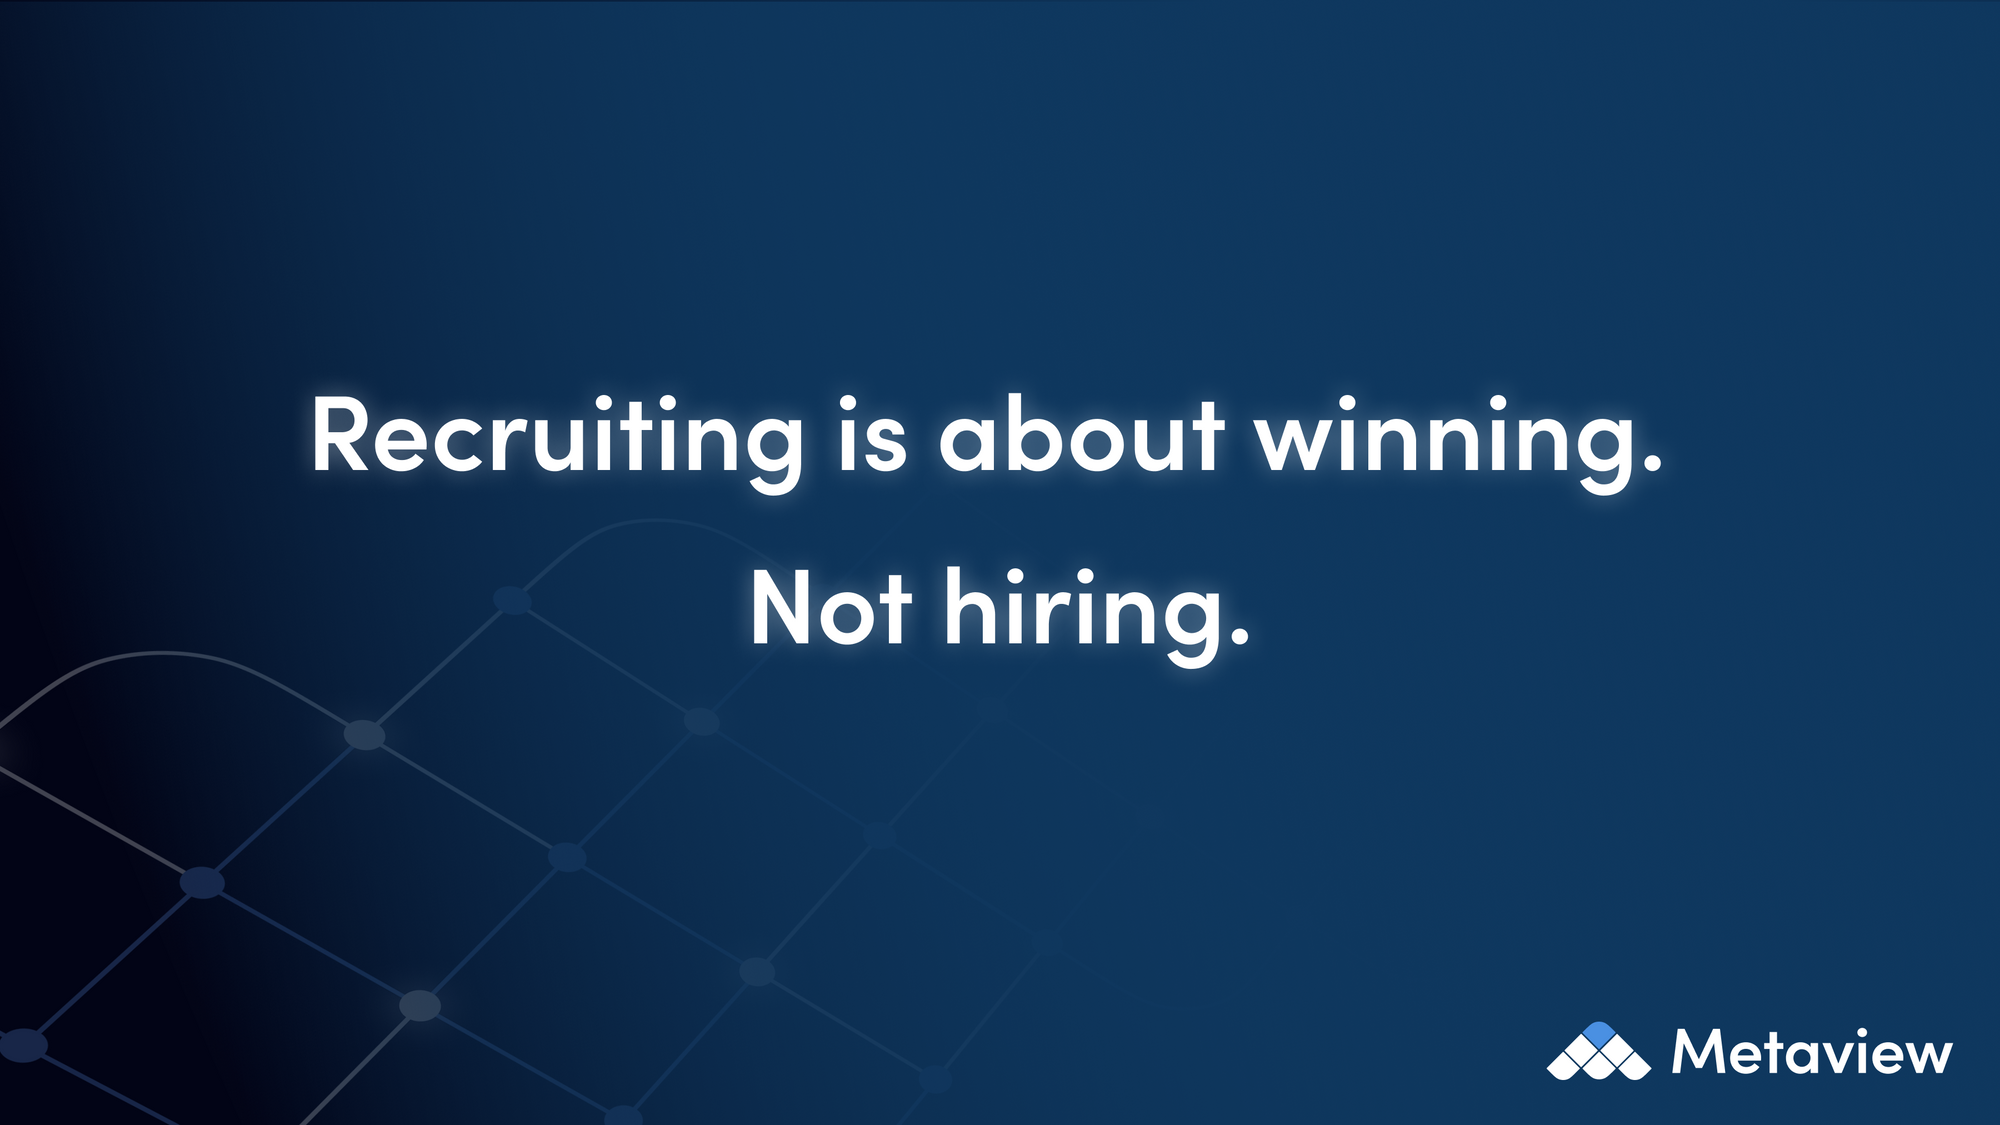 Recruiting is about winning. Not hiring.